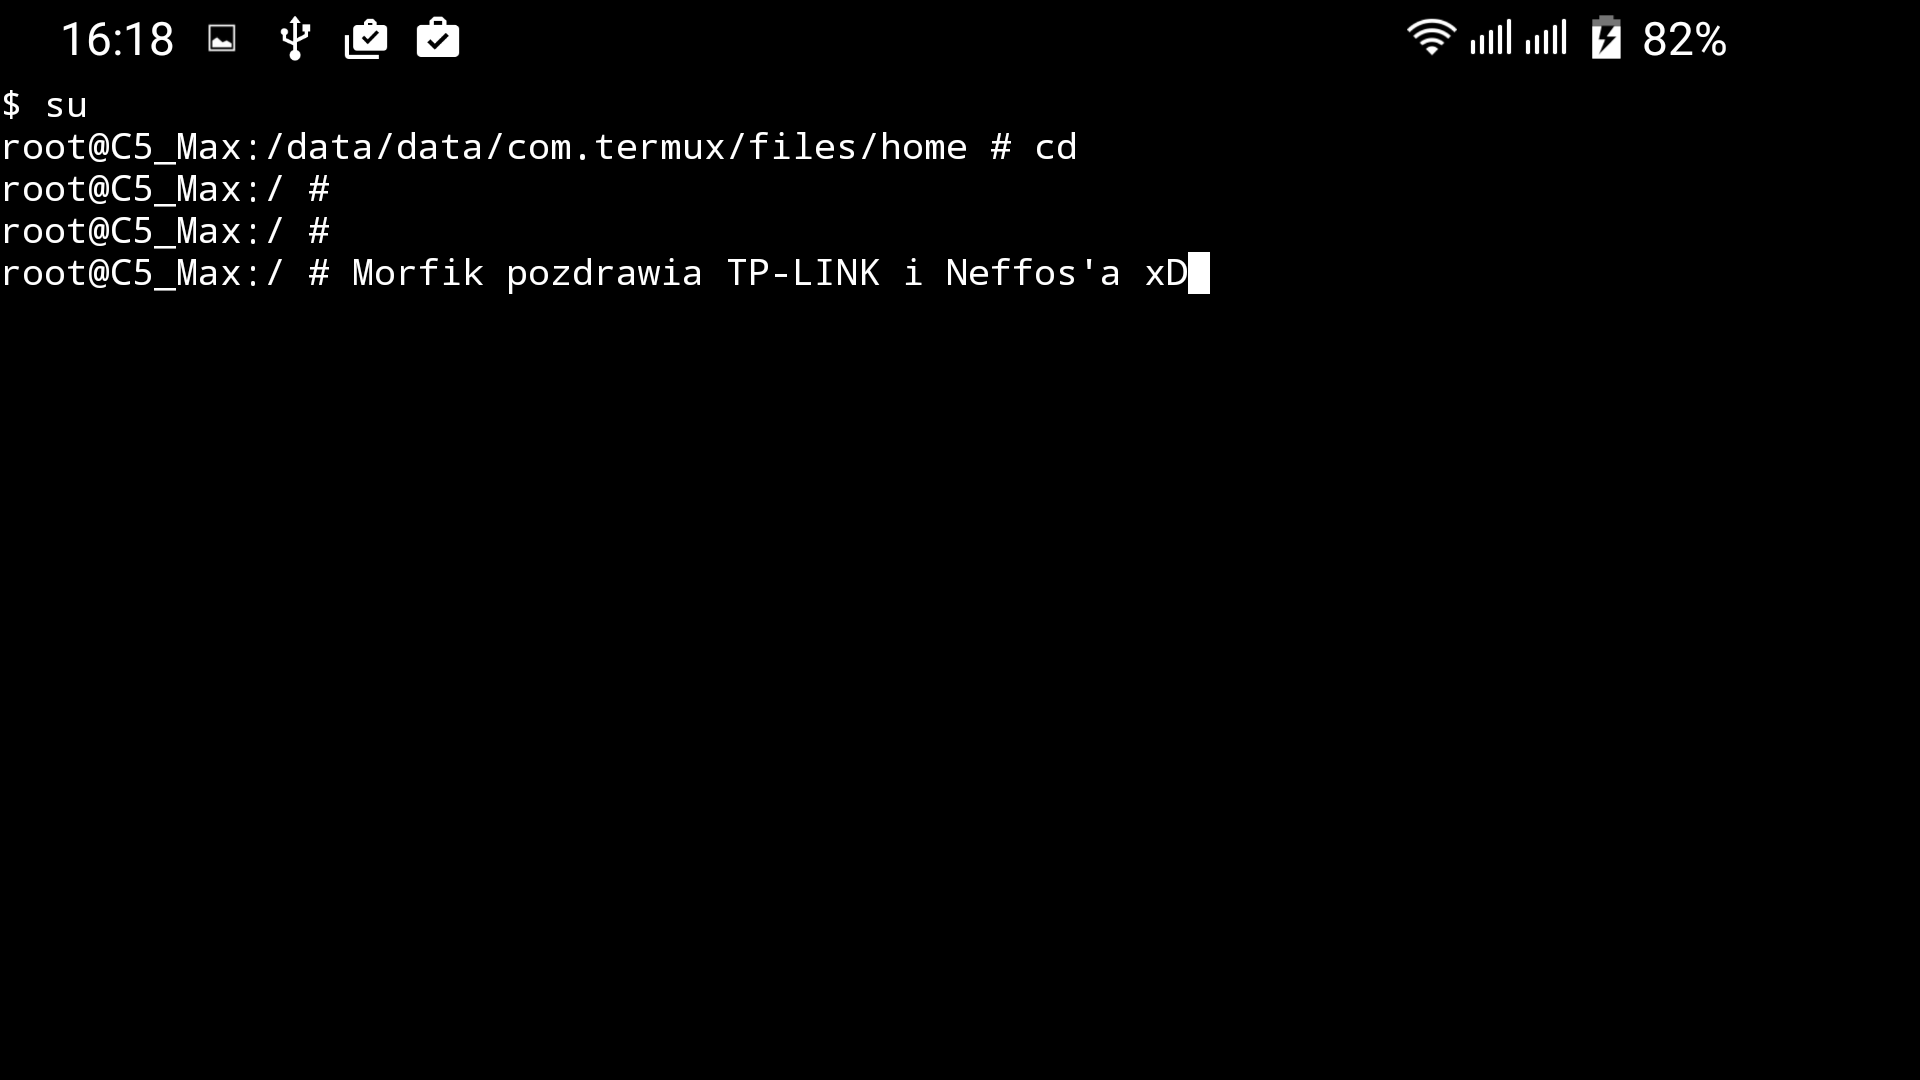 neffos-c5-max-smartfon-root-android-tp-link-termux